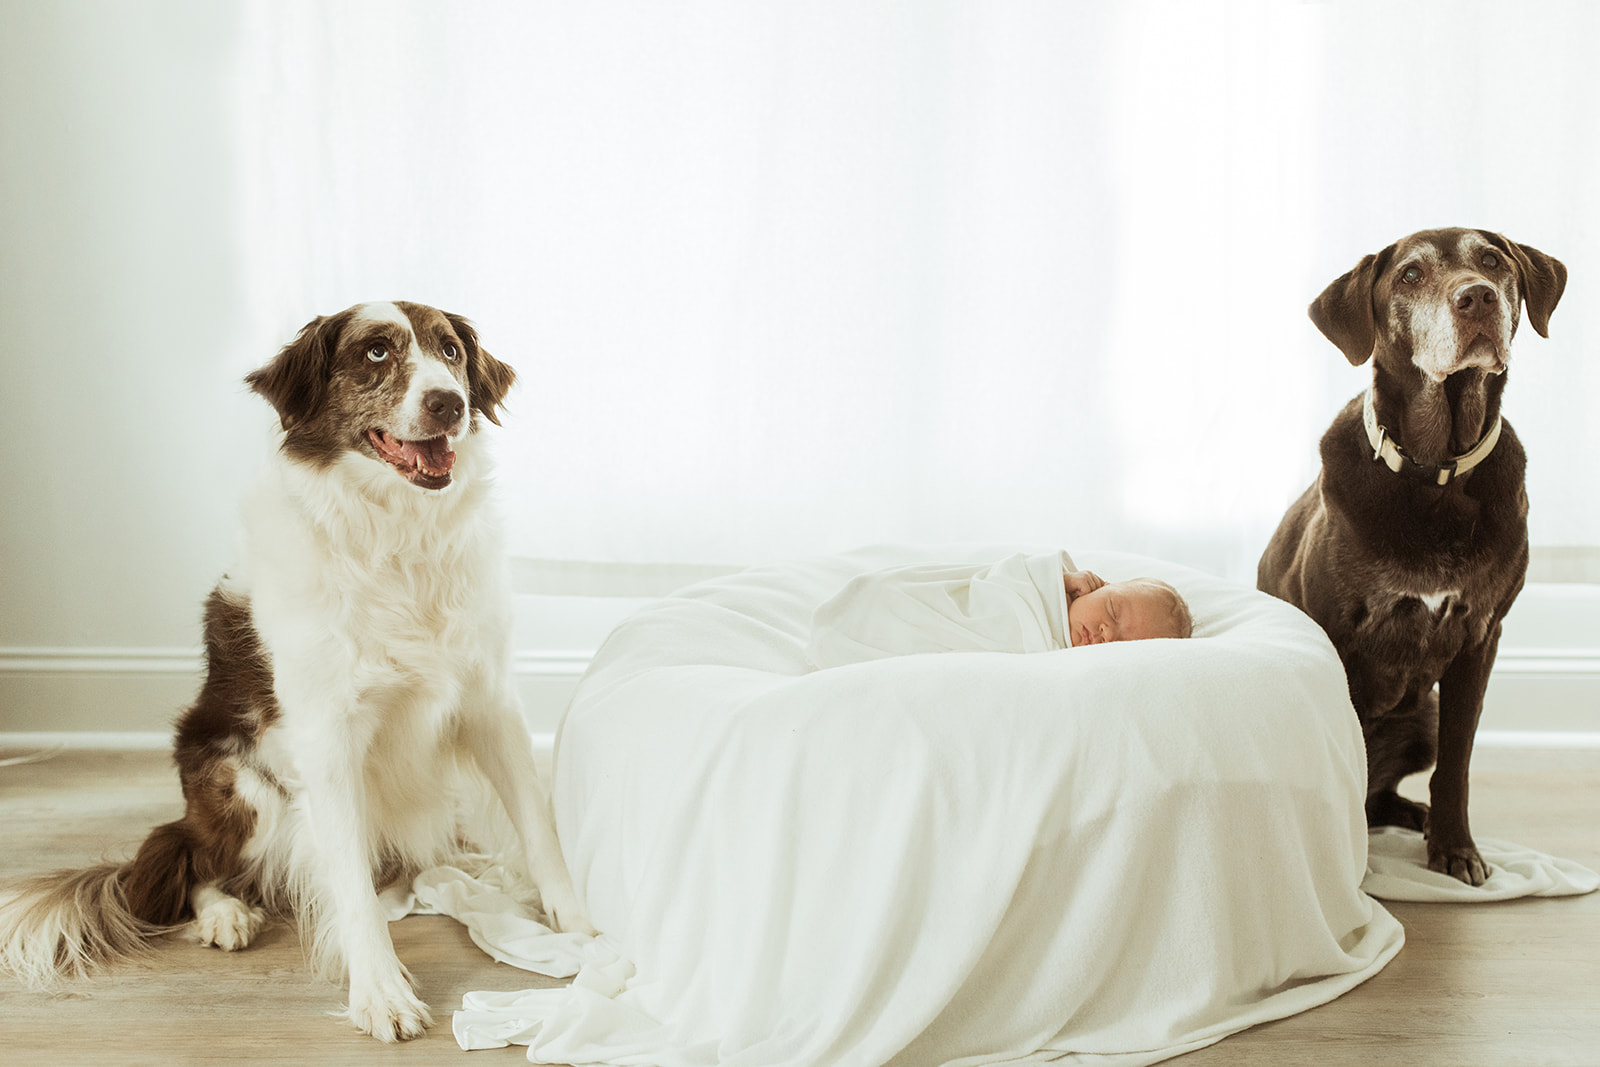 baby Charolette's newborn session in Nashville, Tennessee. photo of baby and two dogs